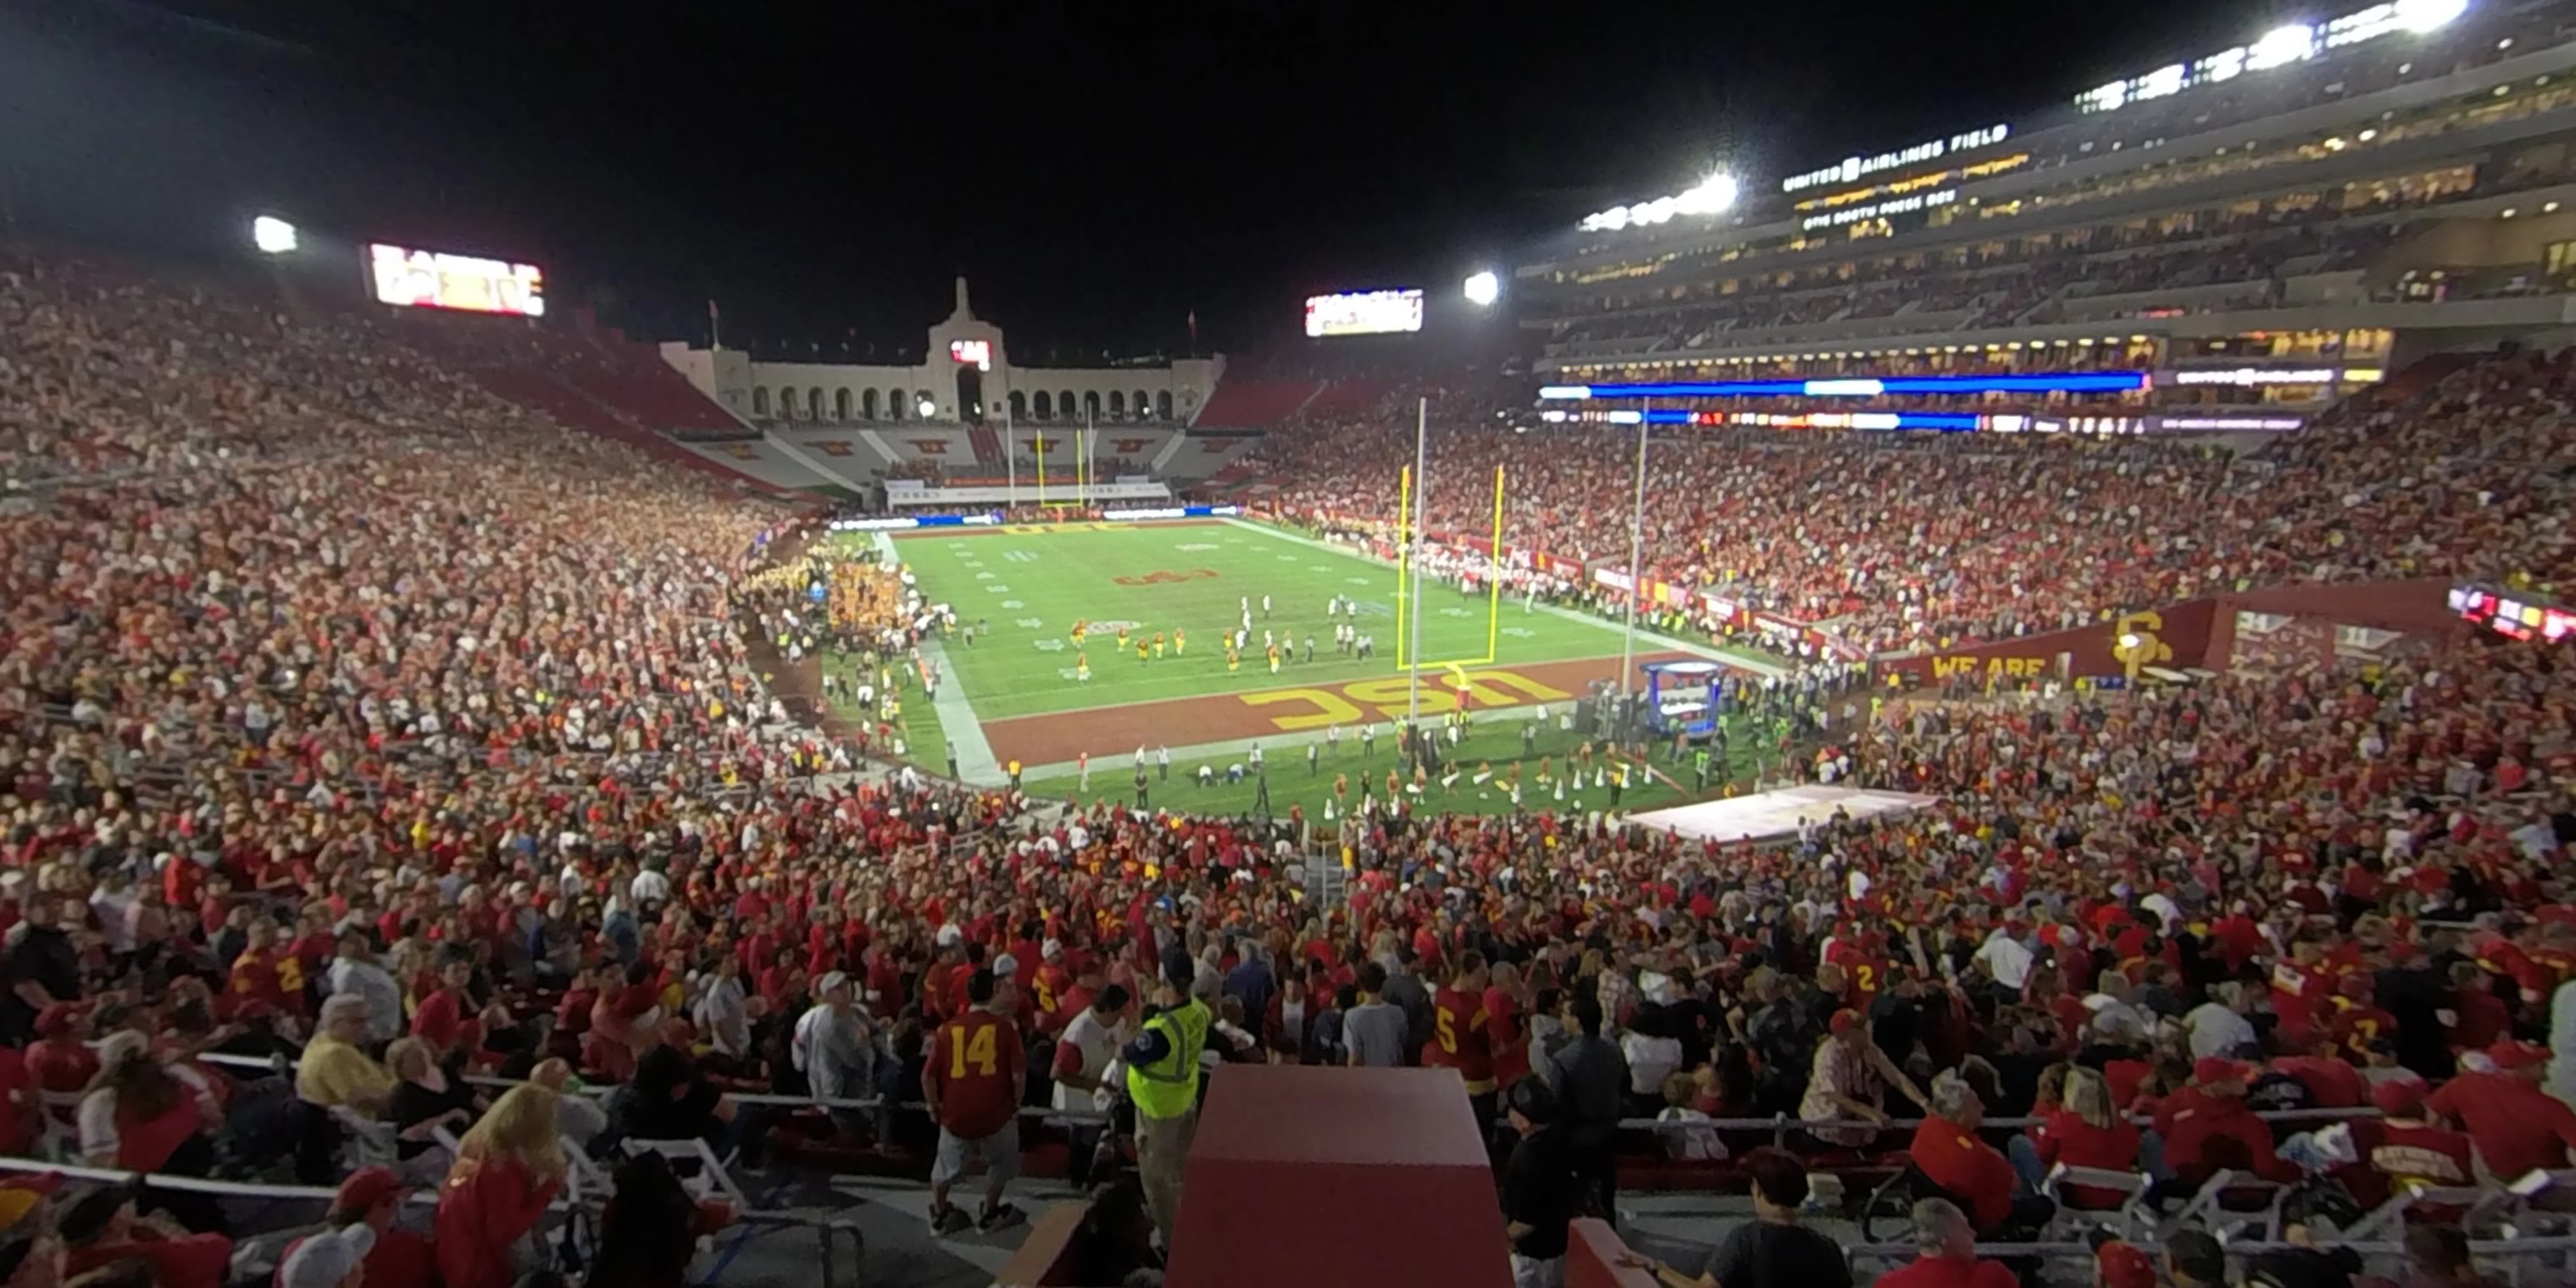 section 215 panoramic seat view  - los angeles memorial coliseum